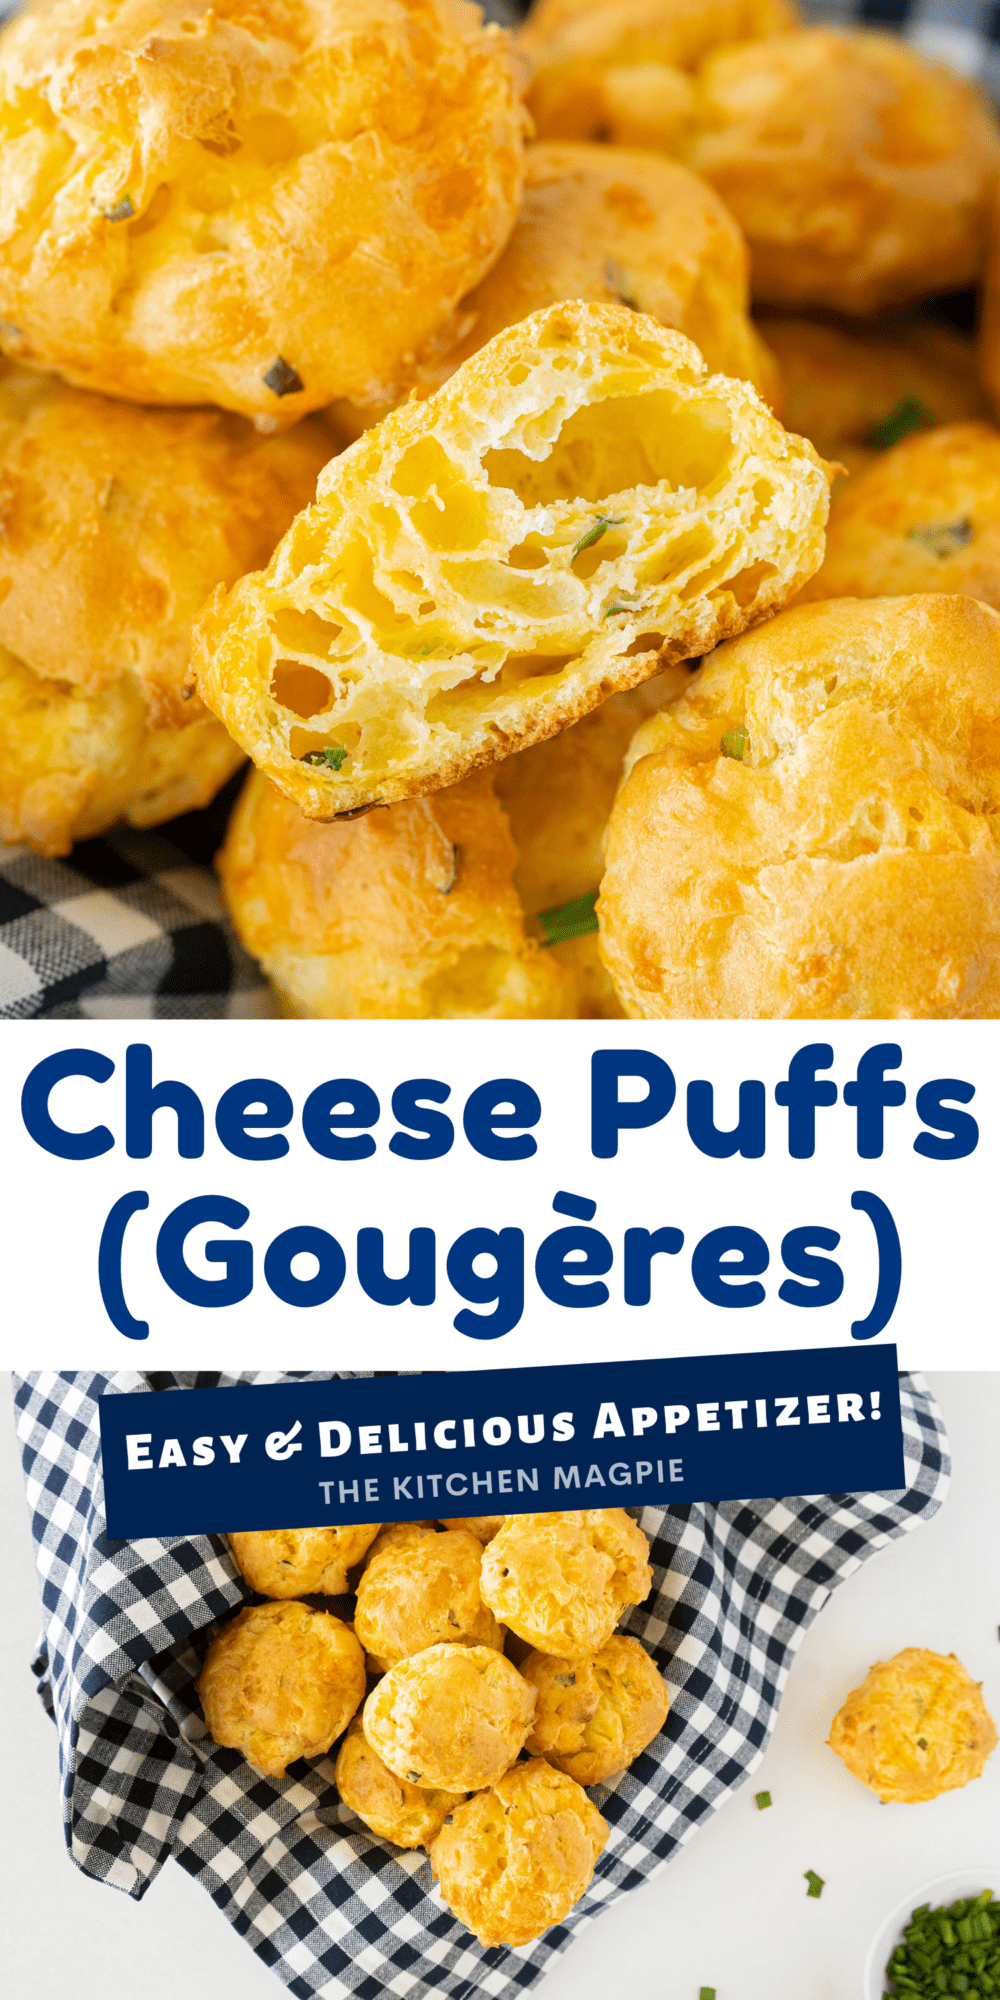 These bite size cheese puffs are also known as gougeres are the perfect party snack or appetizer!